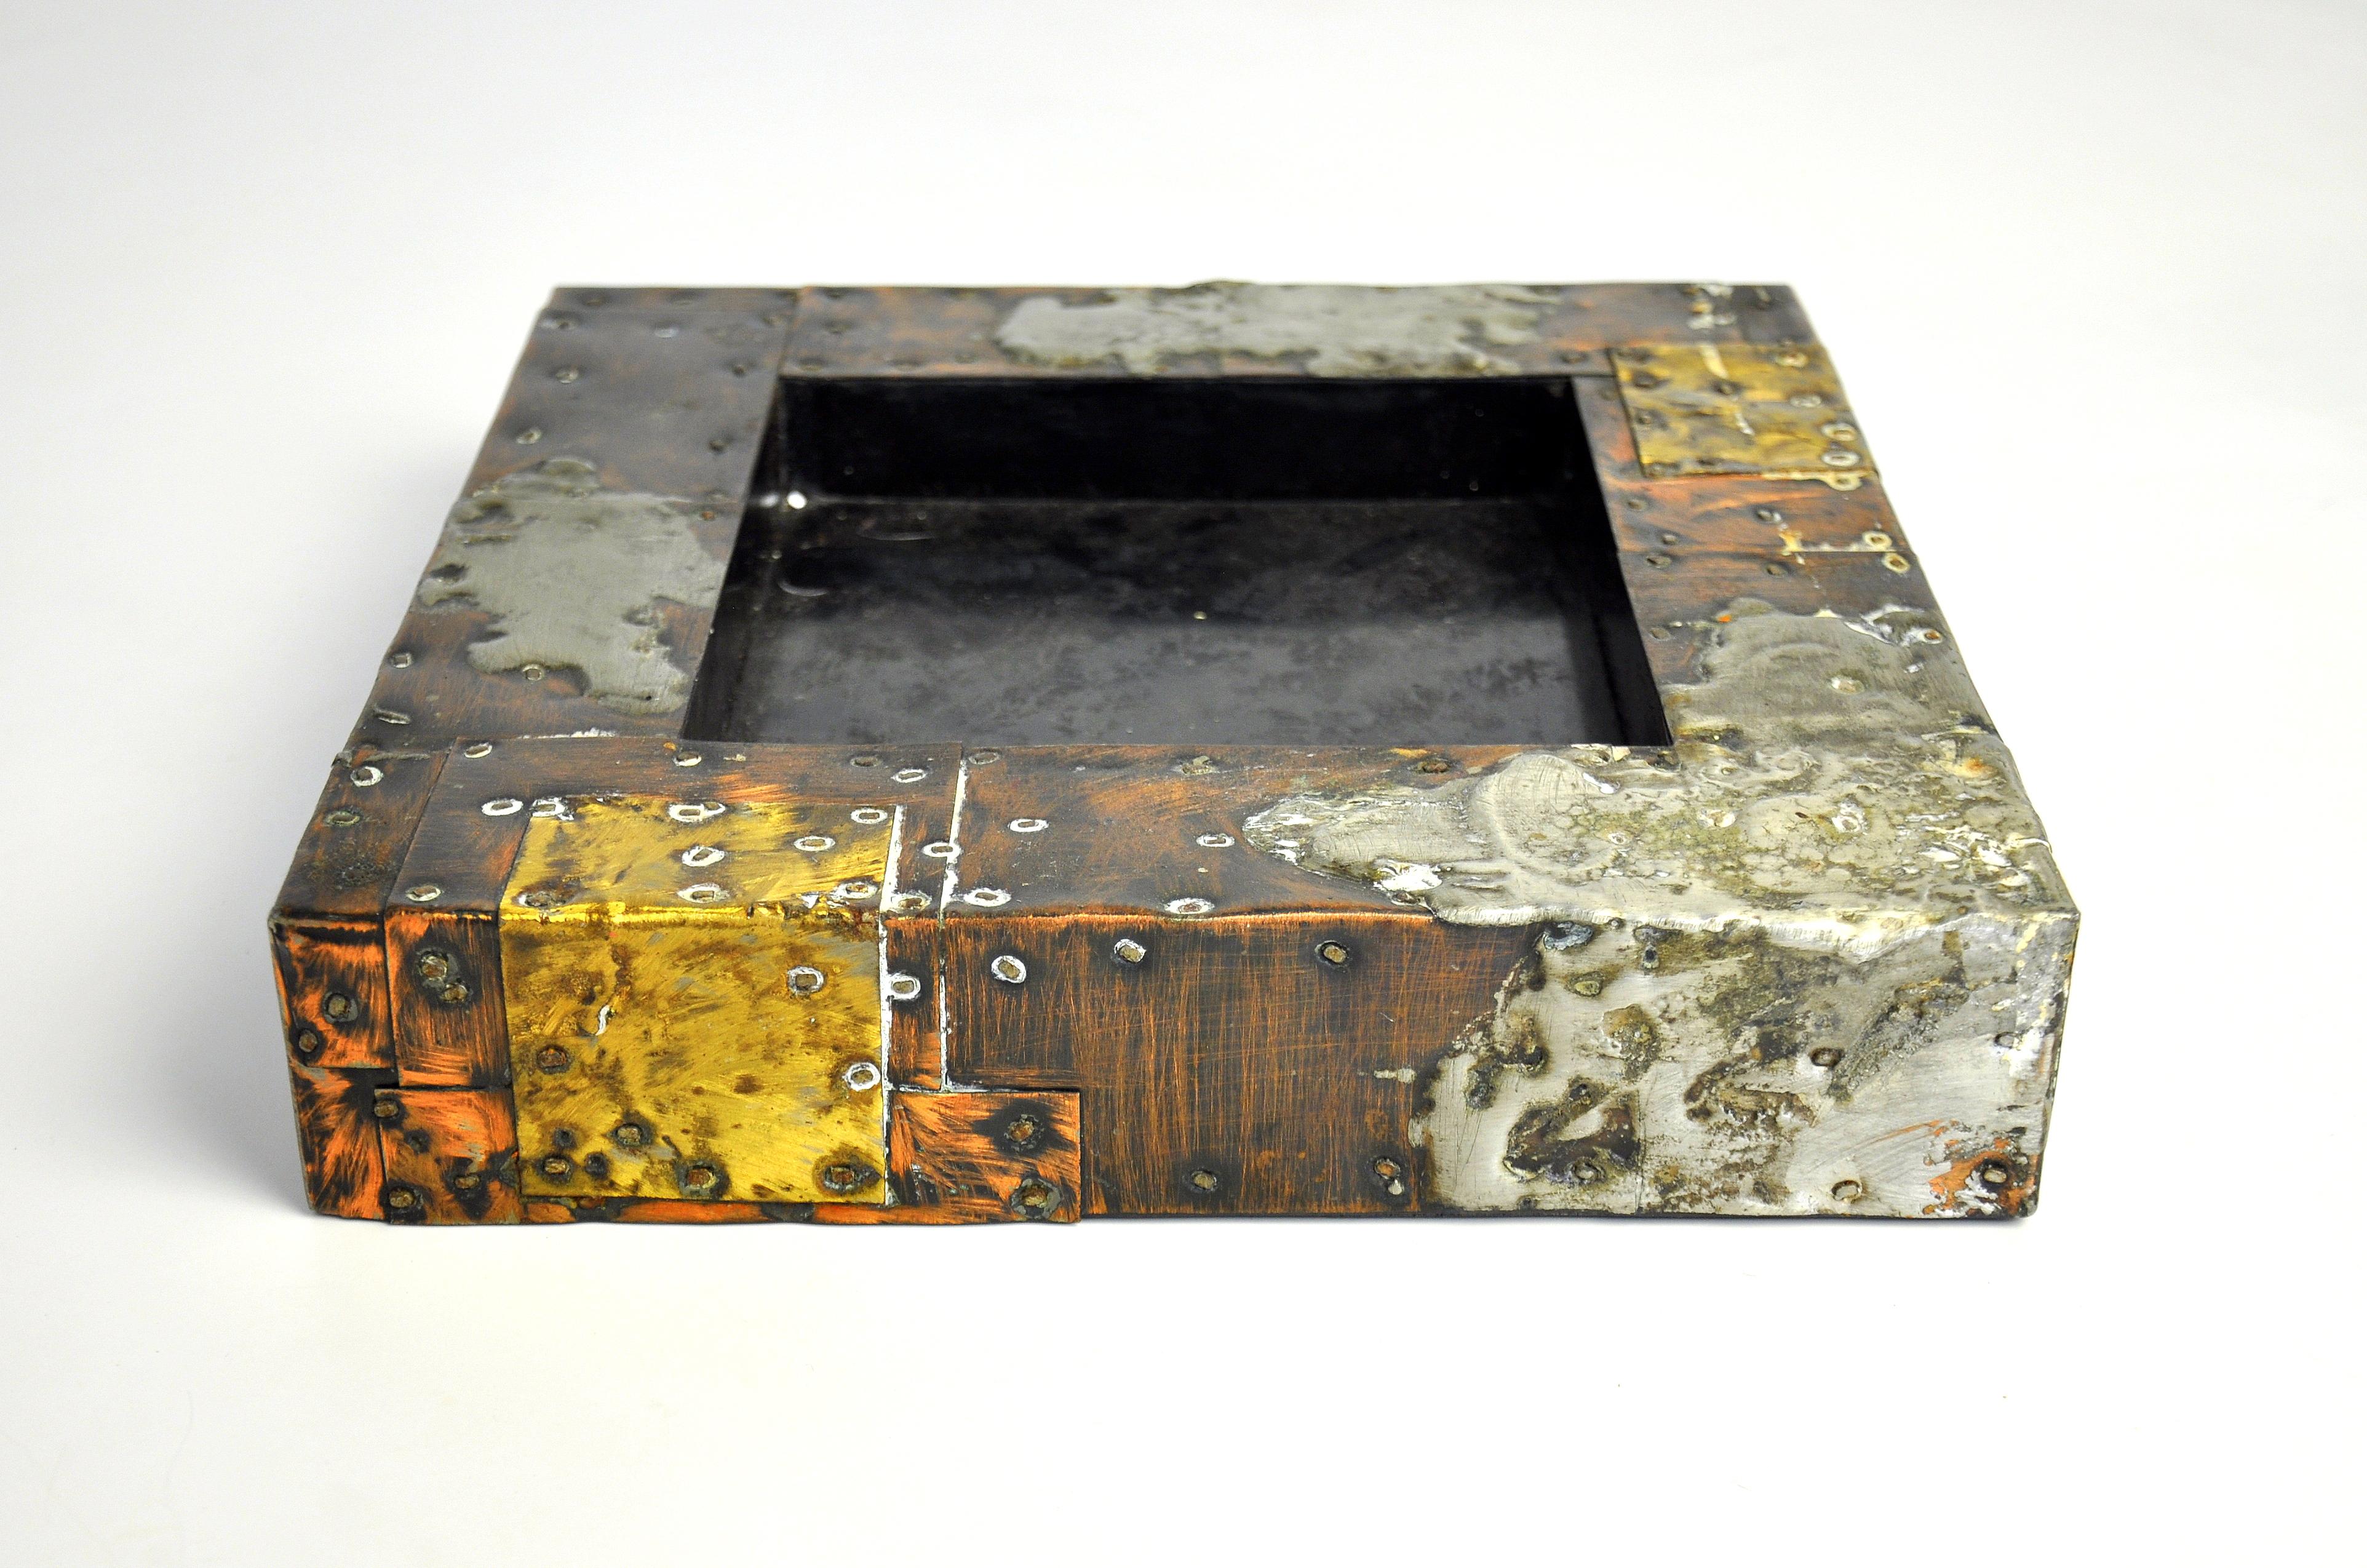 A Brutalist mixed metal vide-poche tray from the Patchwork line by the legendary designer and sculptor Paul Evans for Directional, dating from the 1970s. The tray features bronze, copper, pewter and steel. It can also be used as a desk accessory or